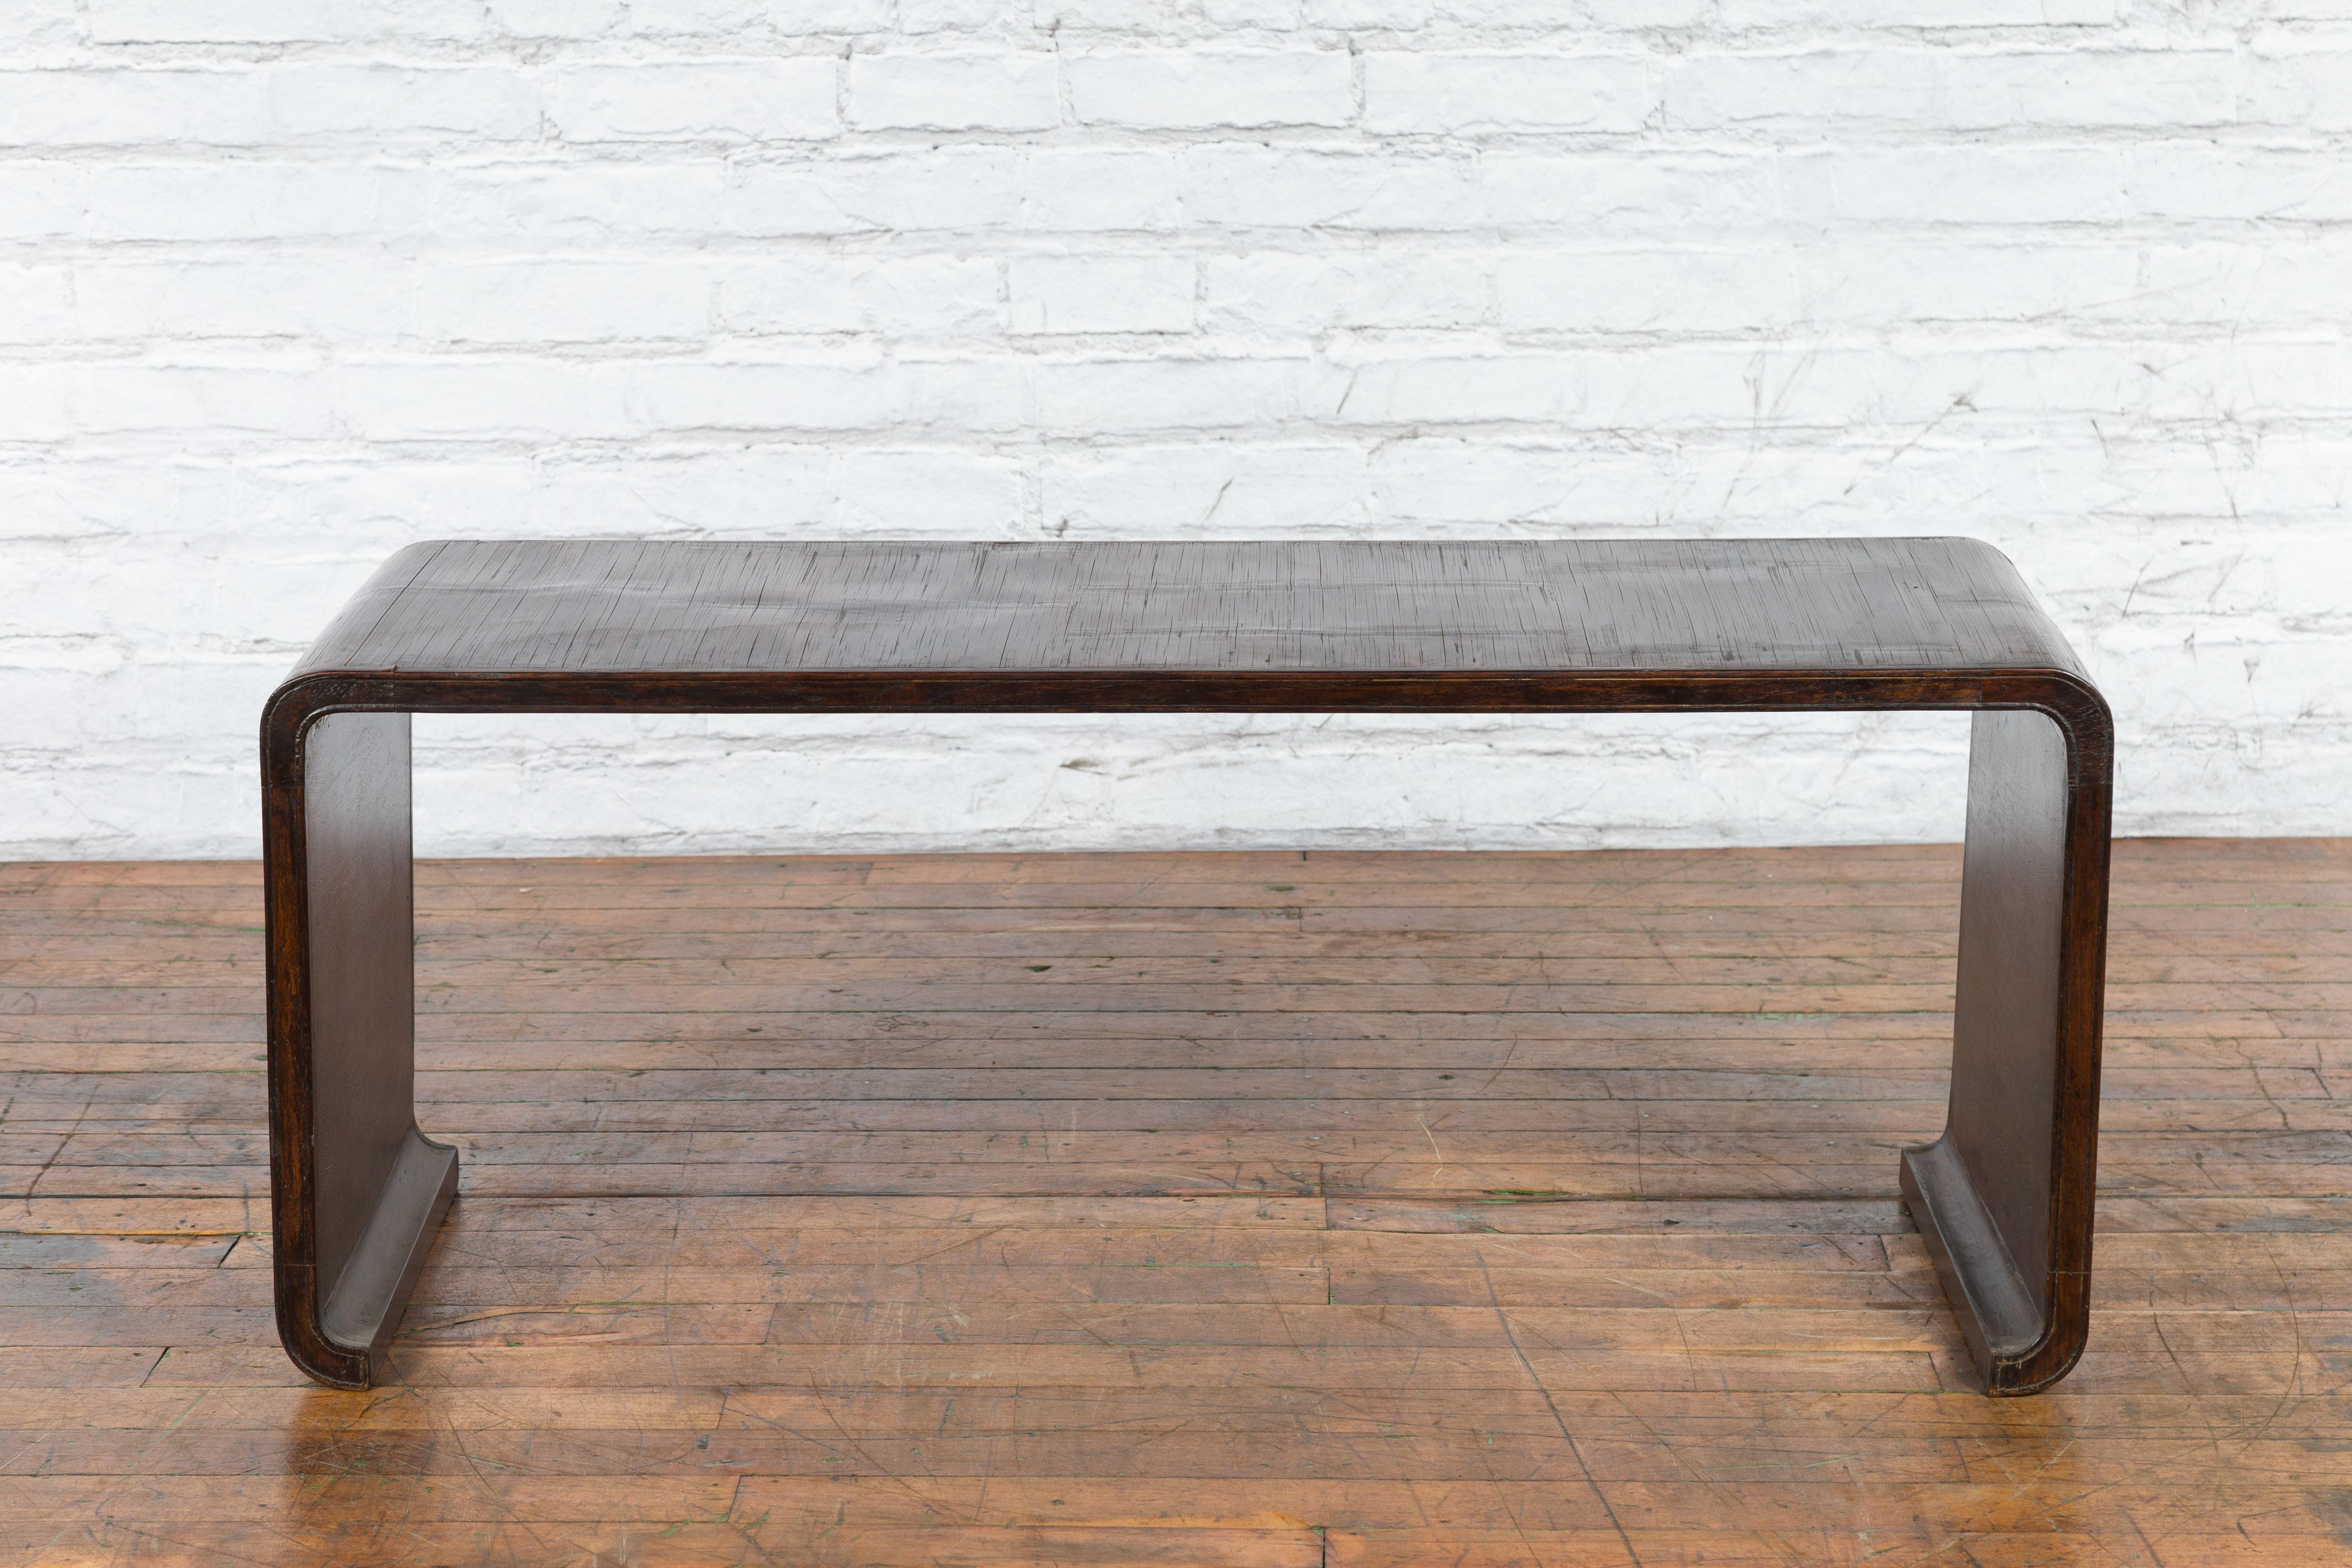 A vintage Burmese waterfall wooden coffee table from the mid-20th century with bamboo opium mat top and dark patina. Created in Burma during the midcentury period, this waterfall coffee table features a rectangular bamboo opium mat top flowing